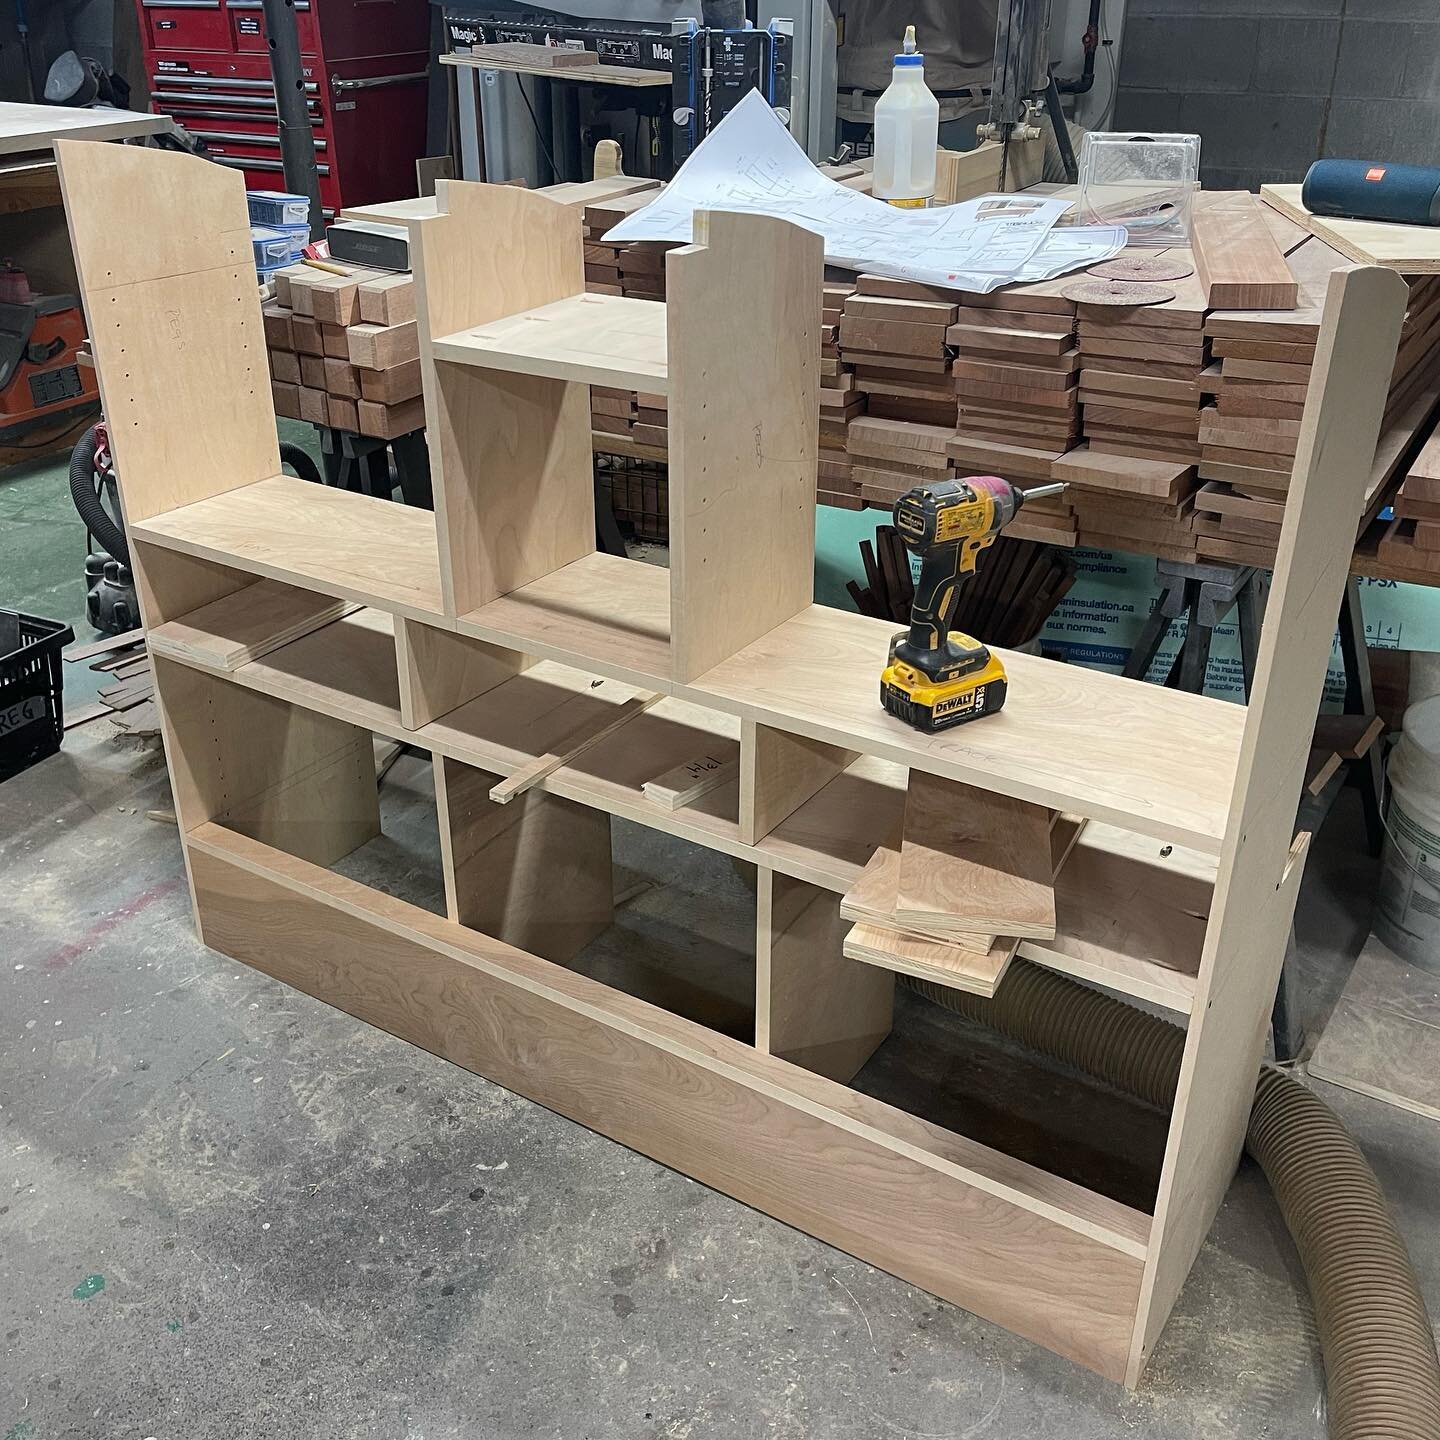 Making progress on the cabin storage. This is everything but the sliding doors and drawers pretty much. 

Initially I had it in the teardrop to make sure it all fit, but now I&rsquo;m finishing it outside to be installed as one piece. 

It&rsquo;s al